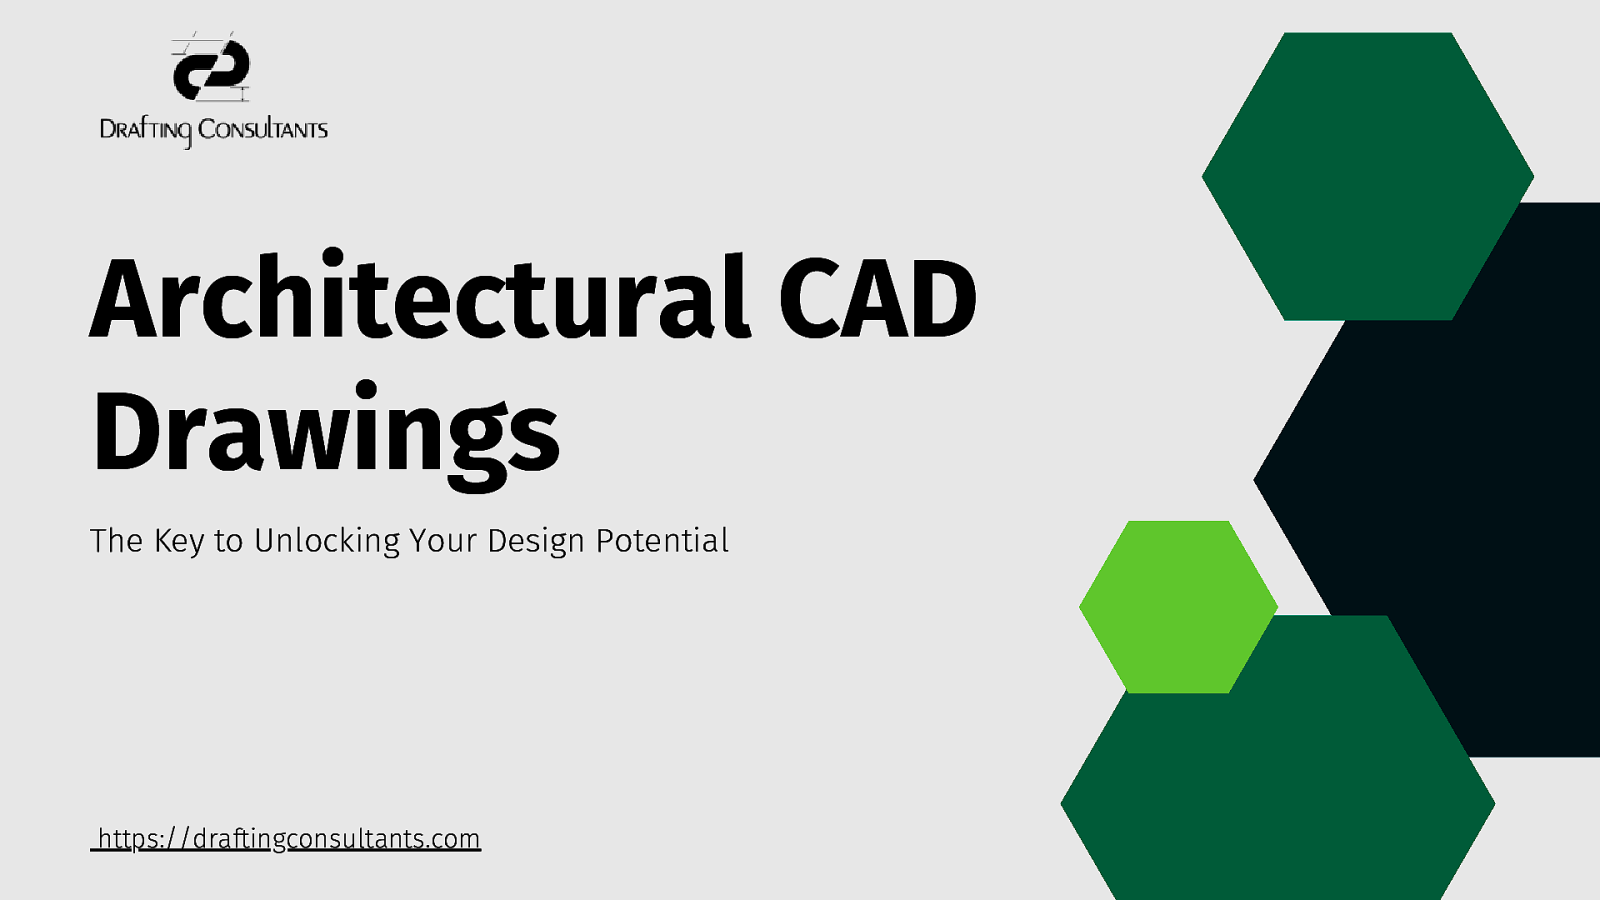 Architectural CAD Drawings: The Key to Unlocking Your Design Potential